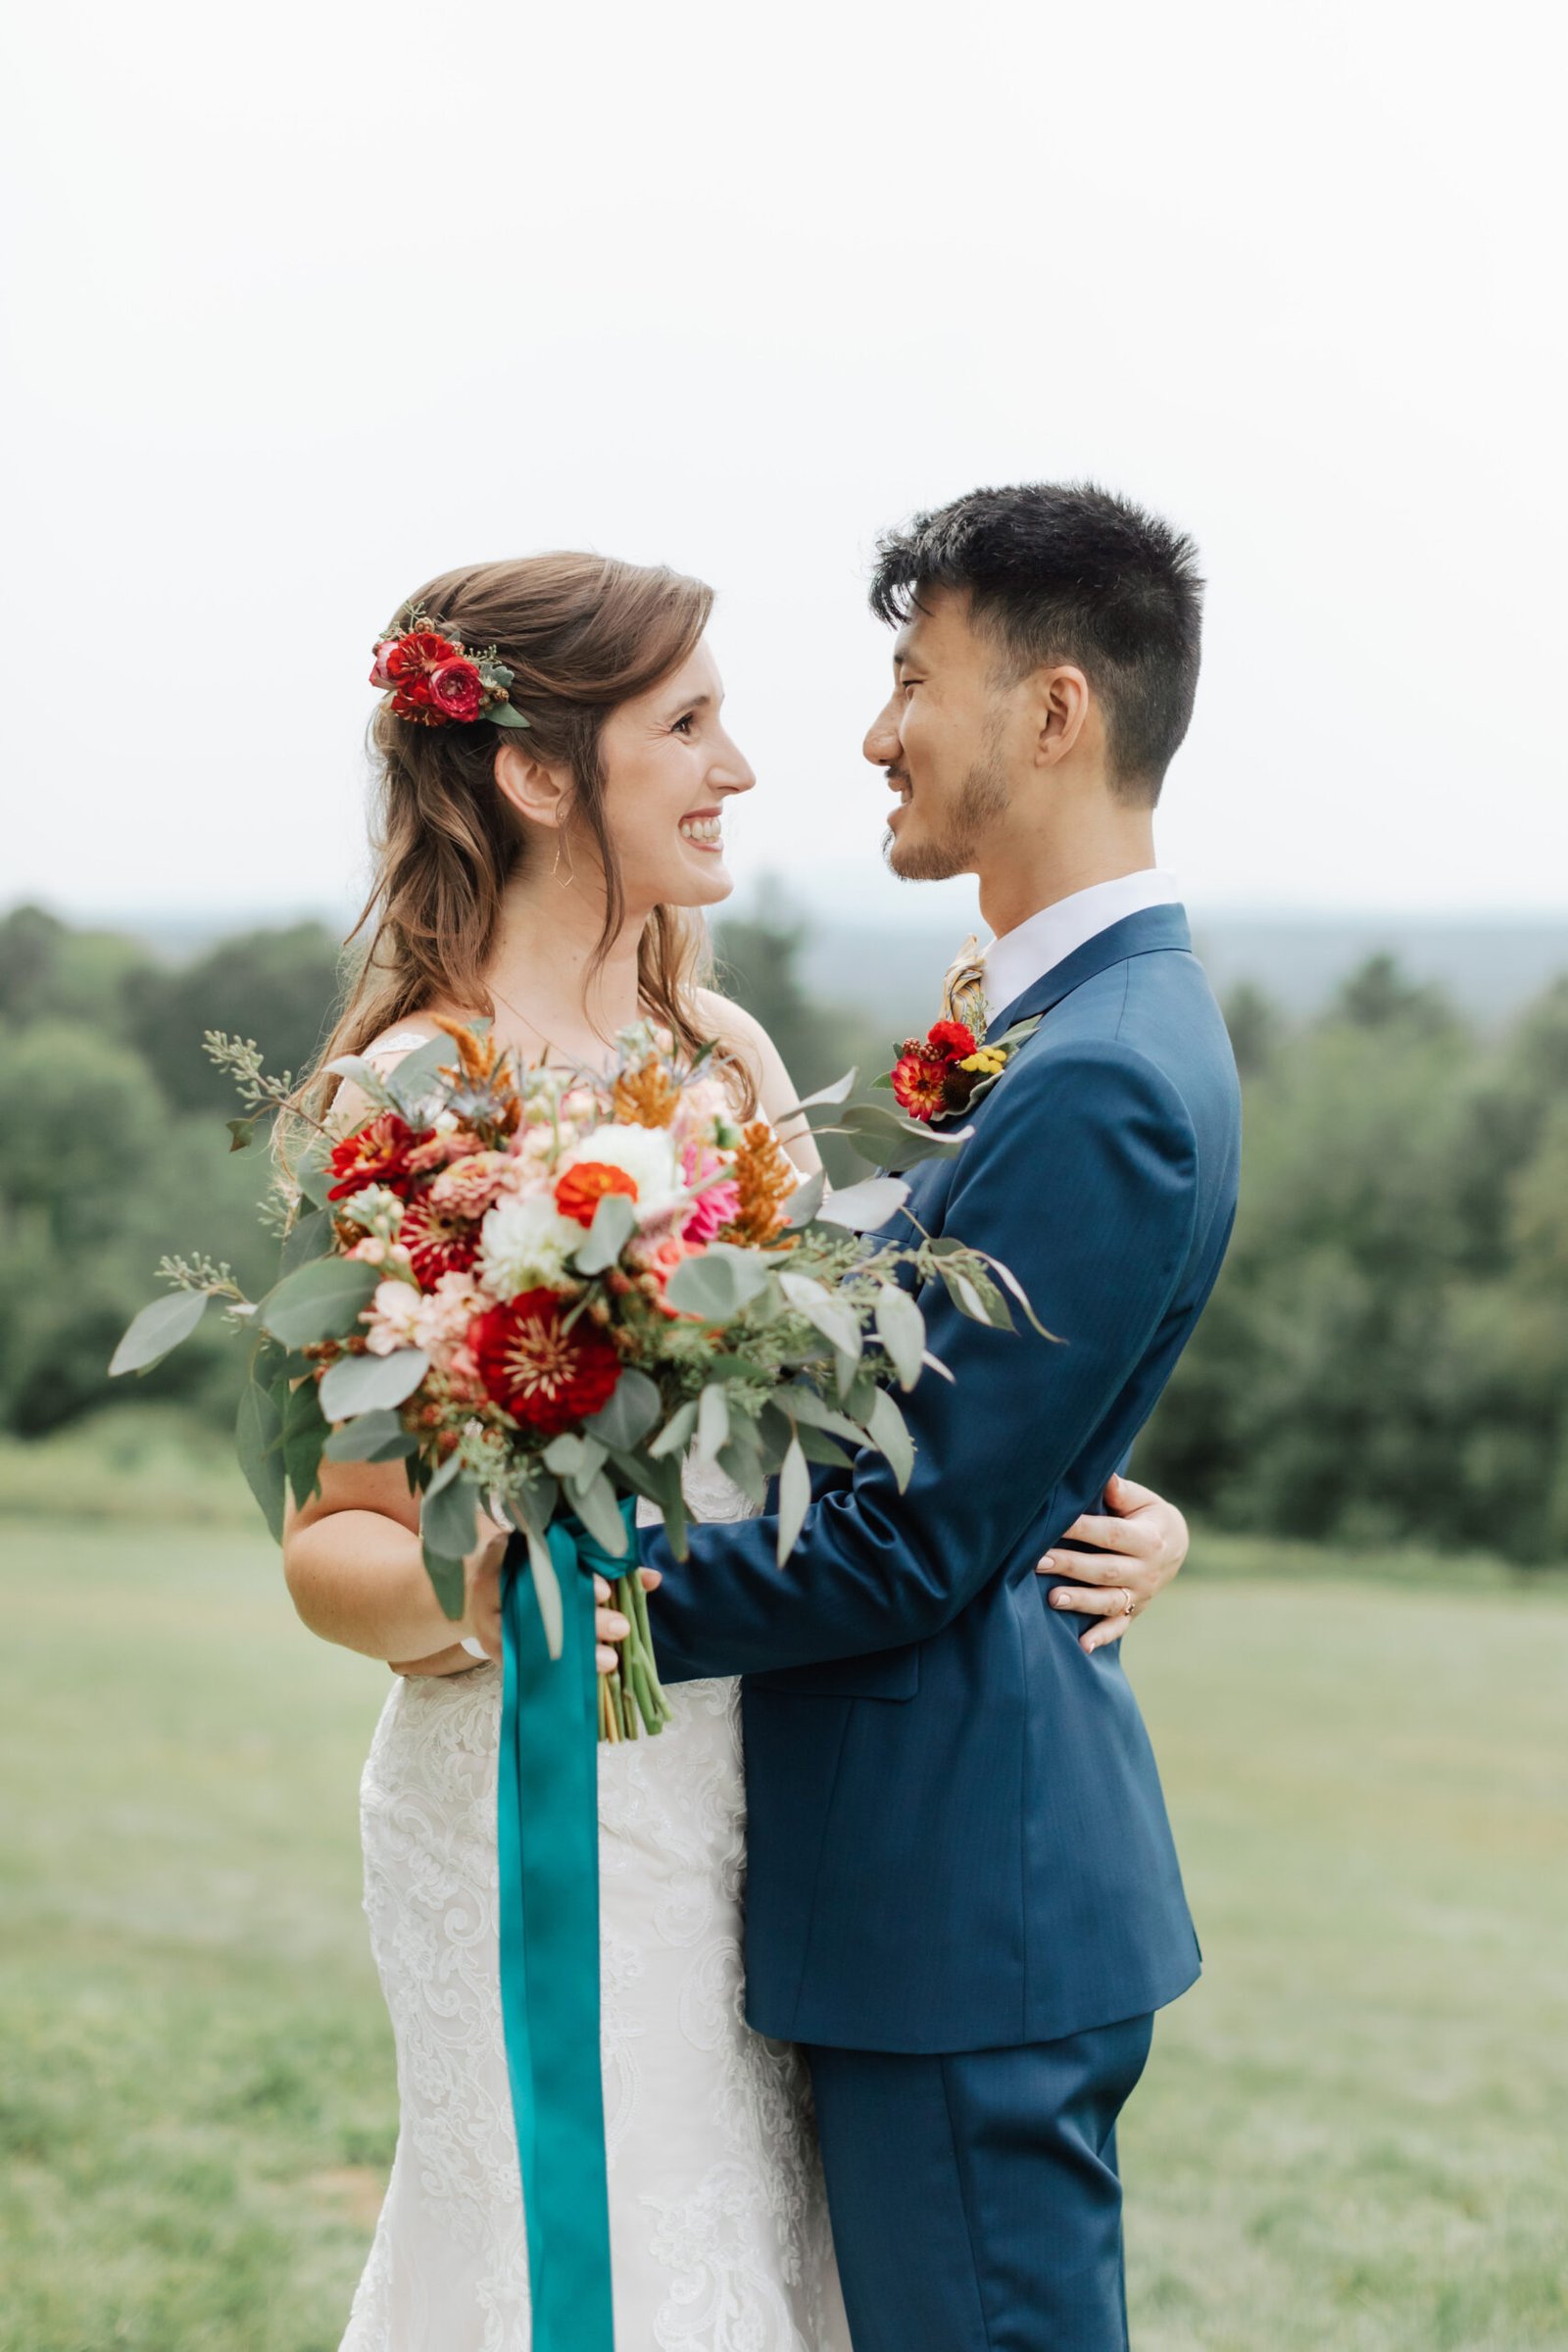 Orchard themed wedding at the historic Fruitlands Museum